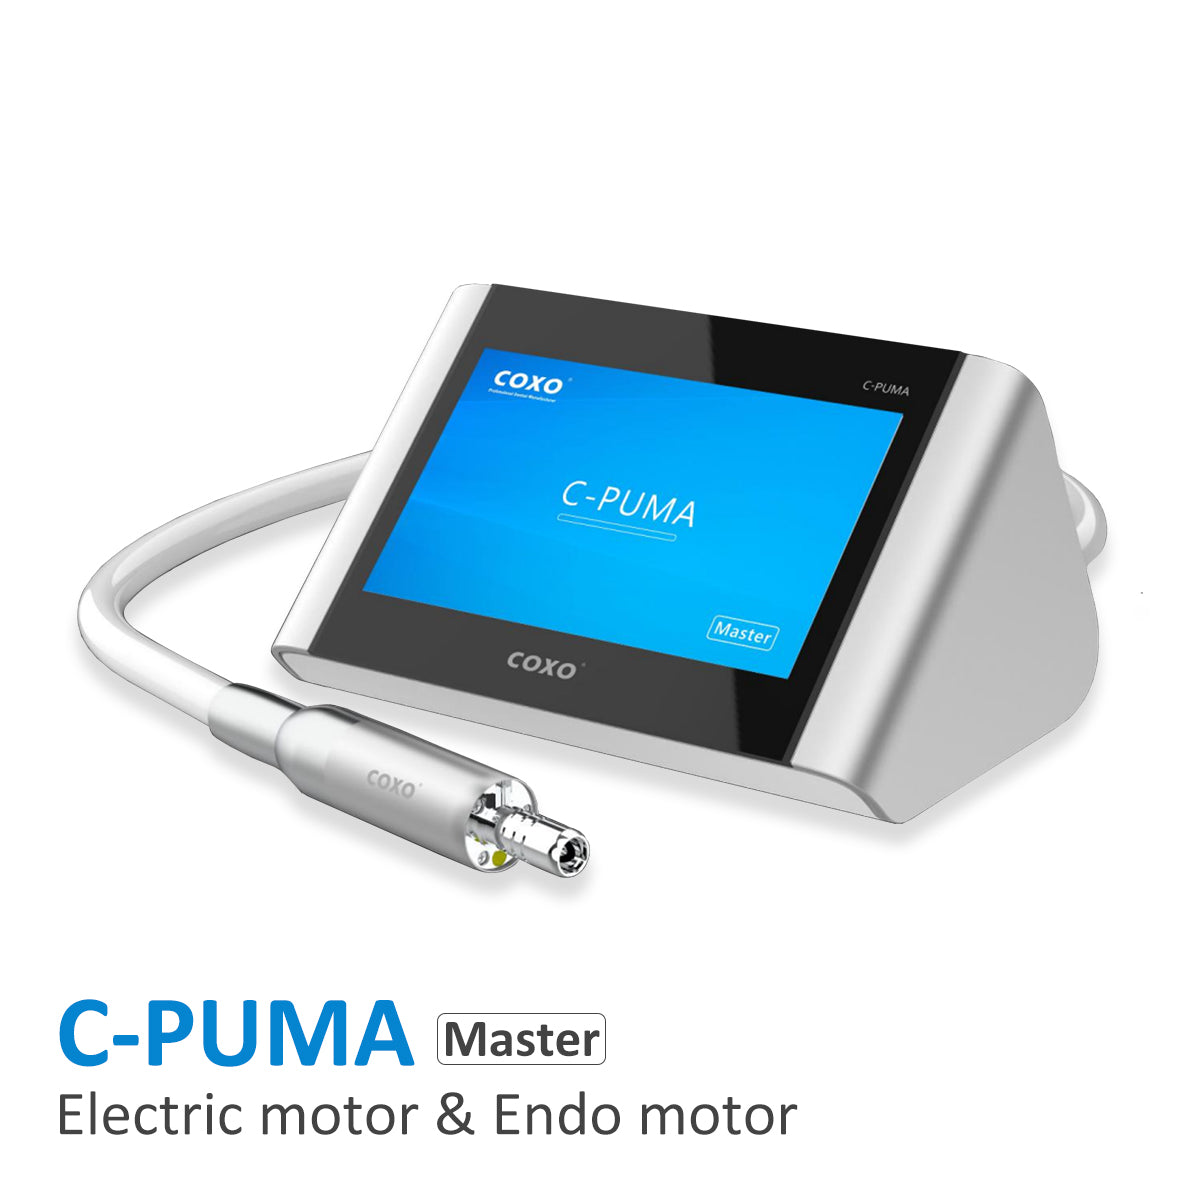 COXO C-puma Master Electric motor and Endo motor 2 in 1 ,comes with two contra angles (1:5 and 6:1)